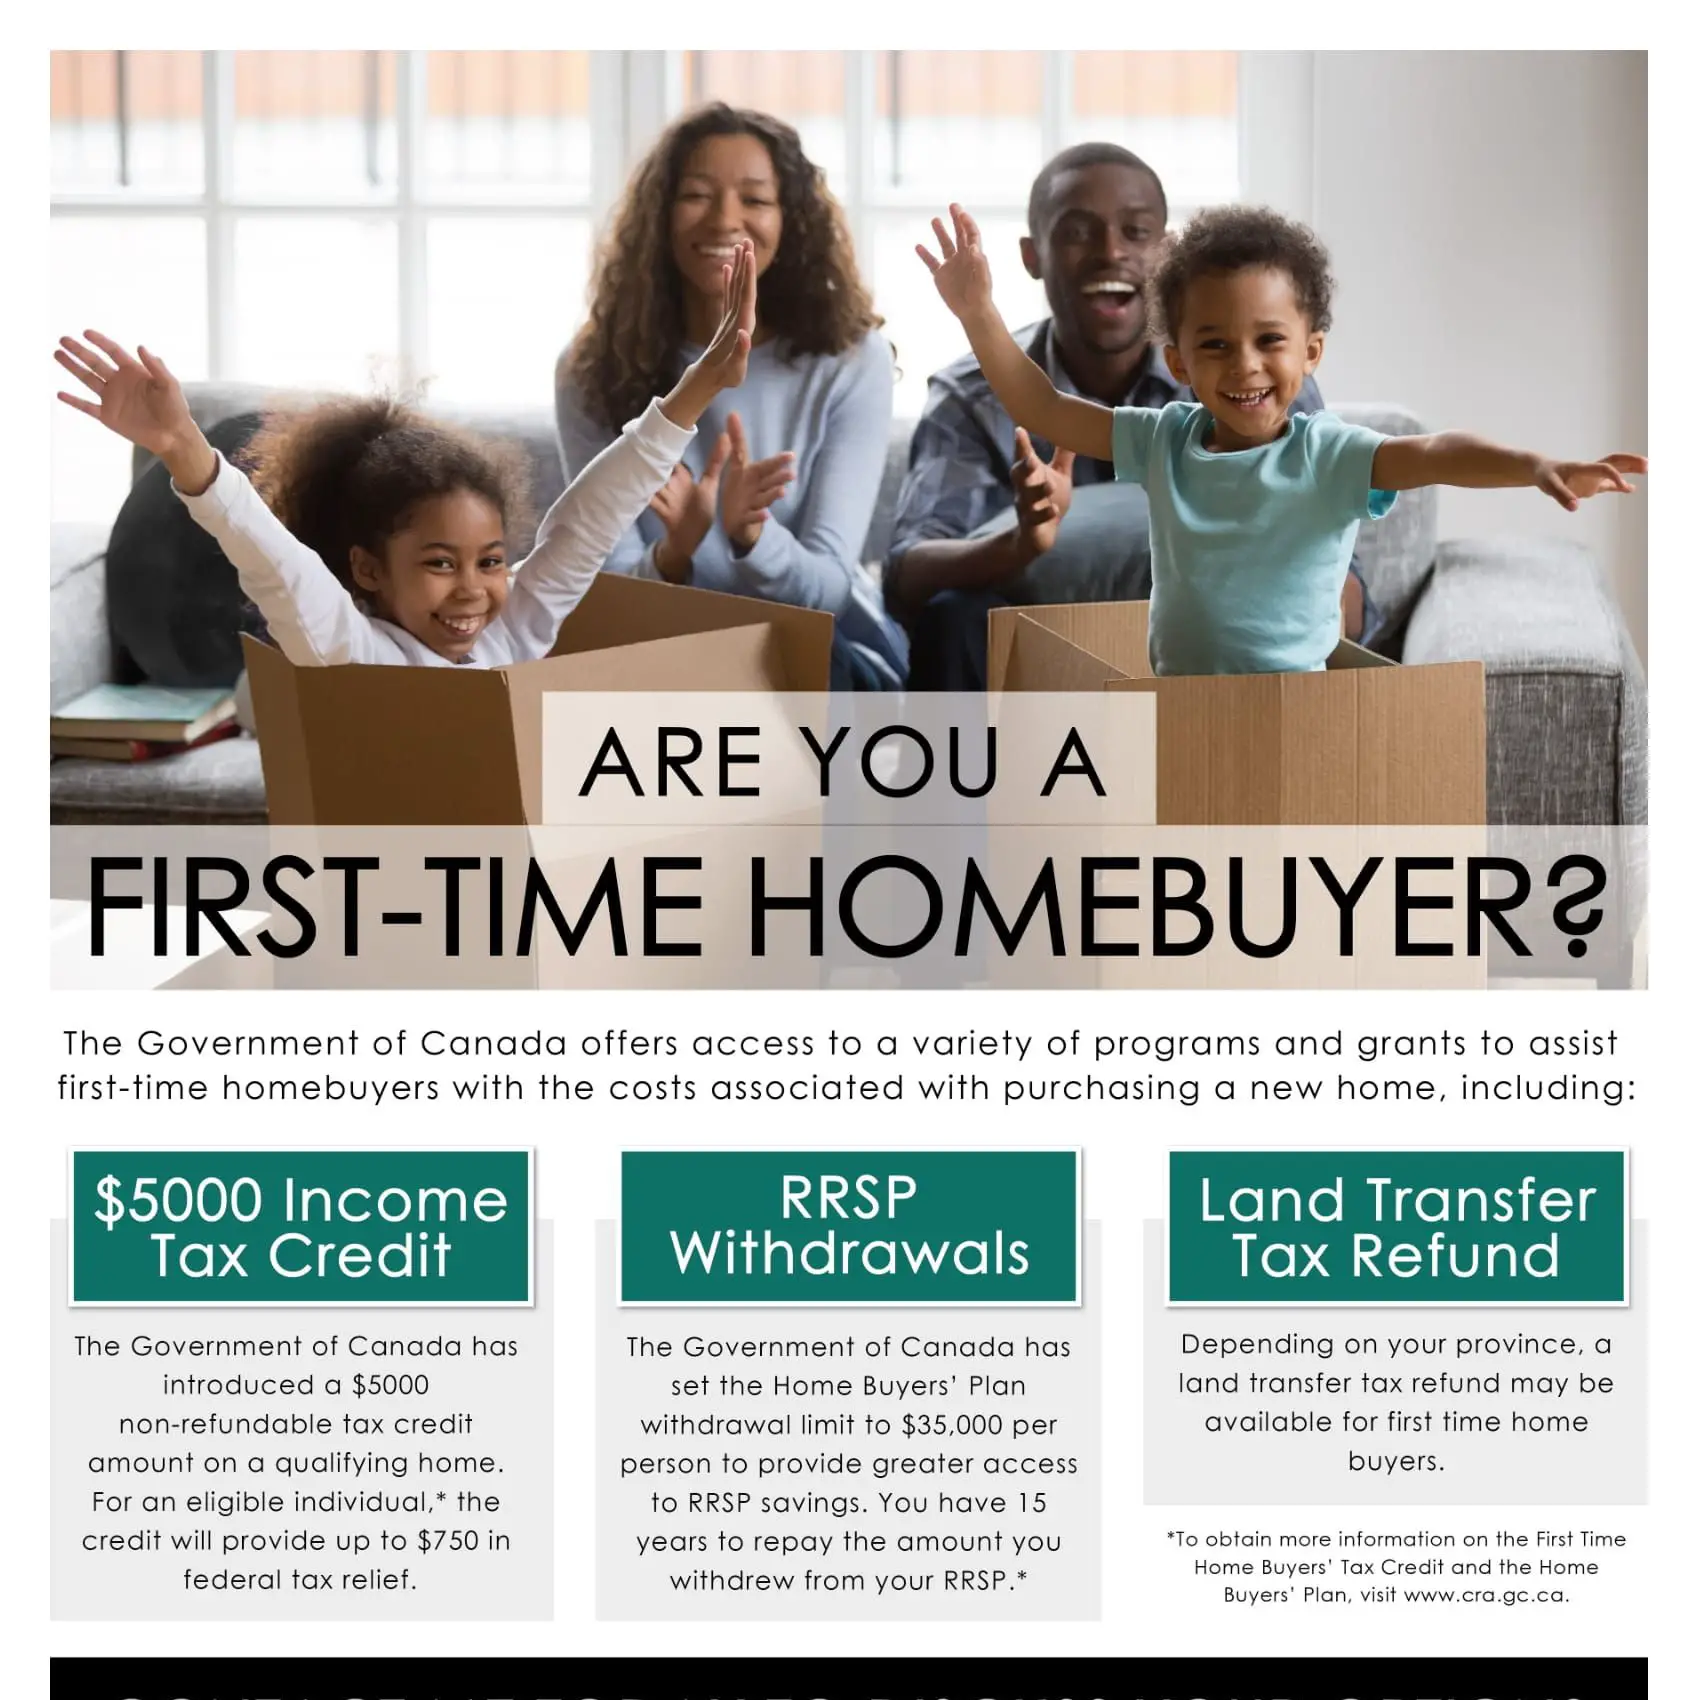 First Time Home Buyer Program and Grants